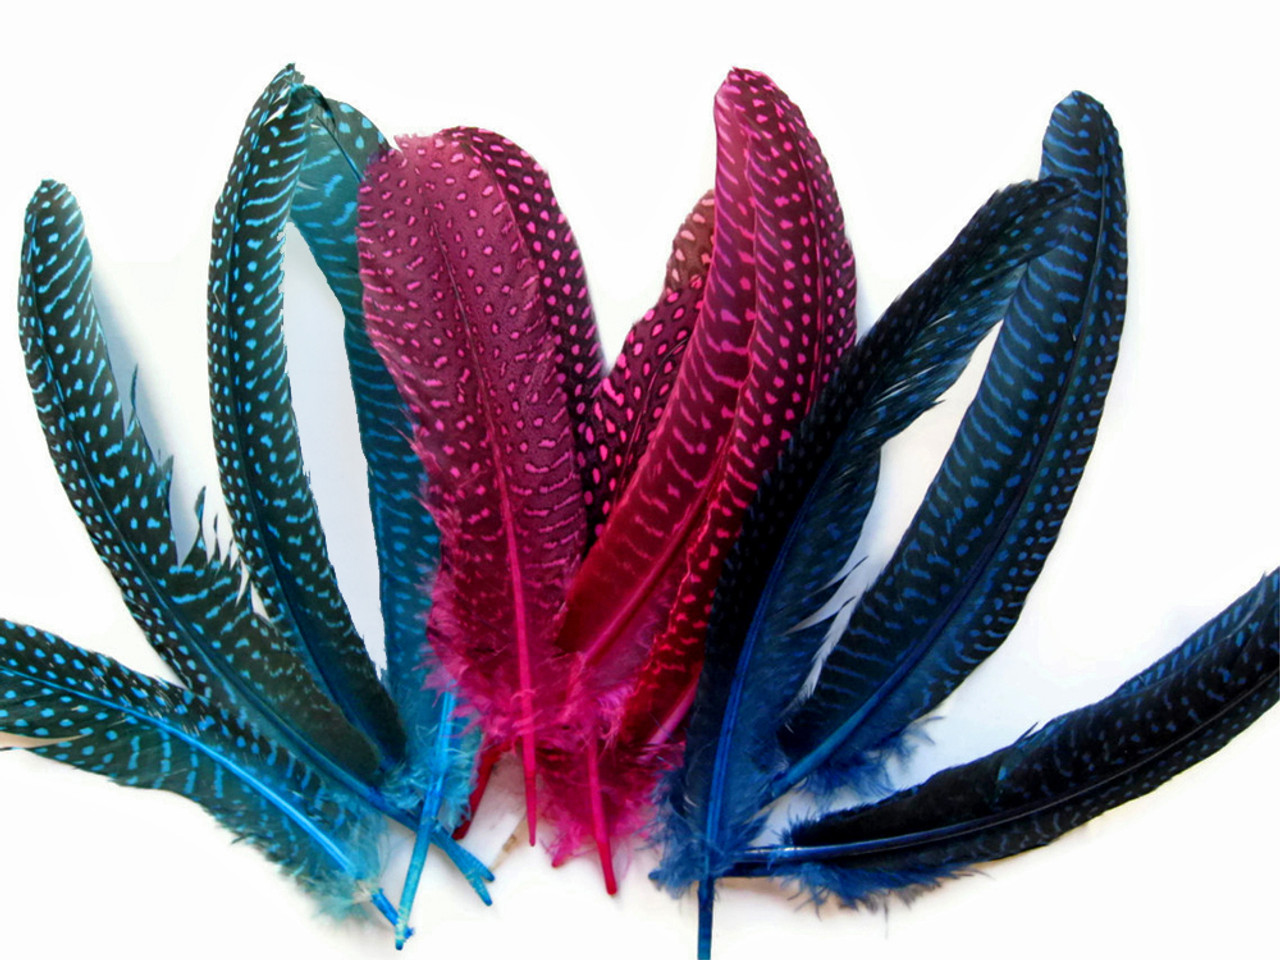 GUINEA FOWL FEATHERS - Fly Tying Materials - 12 COLORS - Fly Tying Feathers  NEW